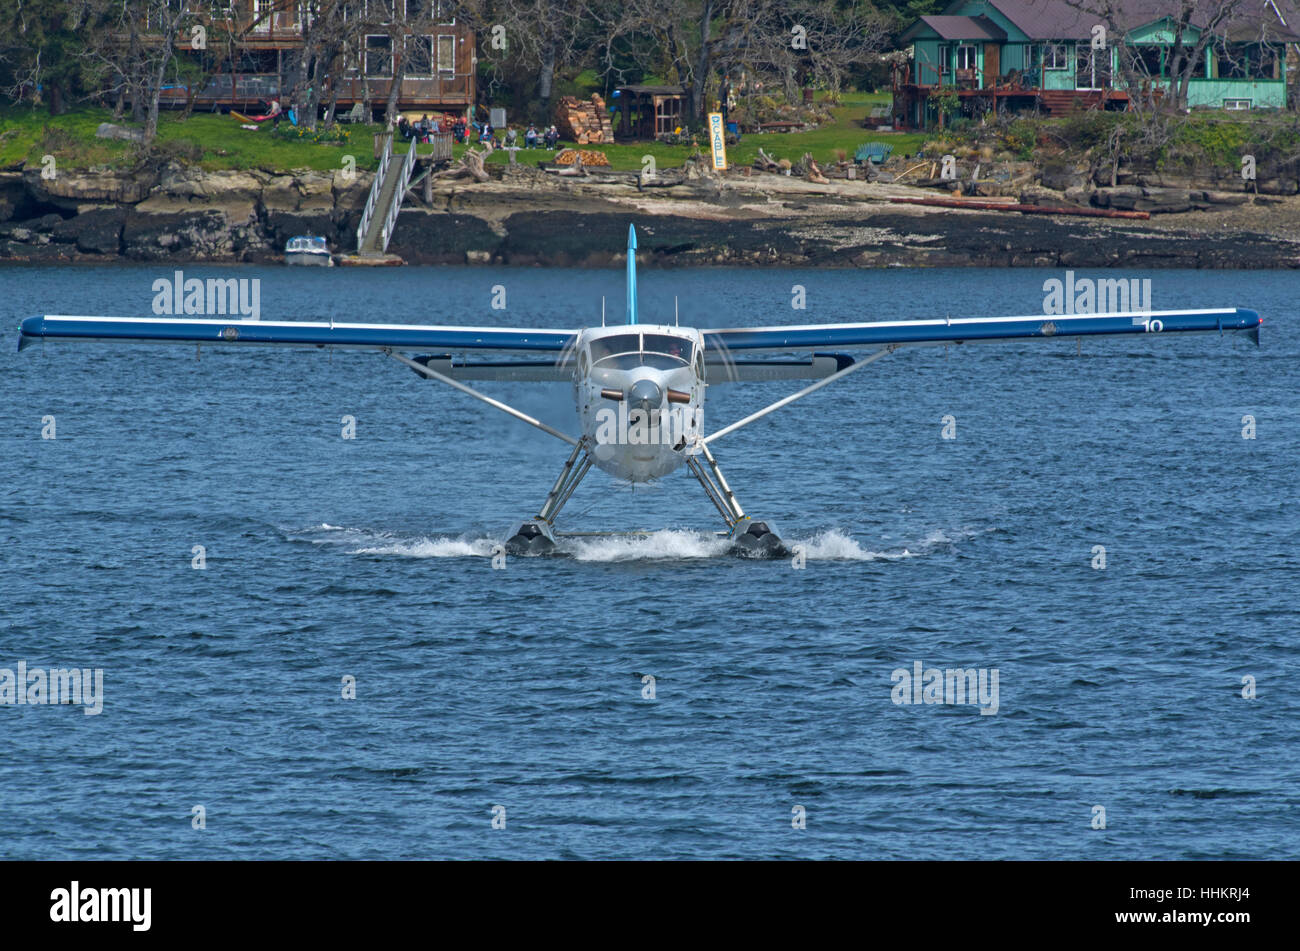 Harbour Air float plane approaching its berthing pontoon at Nanaimo, Vancouver Island, BC Canada. SCO 11,685. Stock Photo